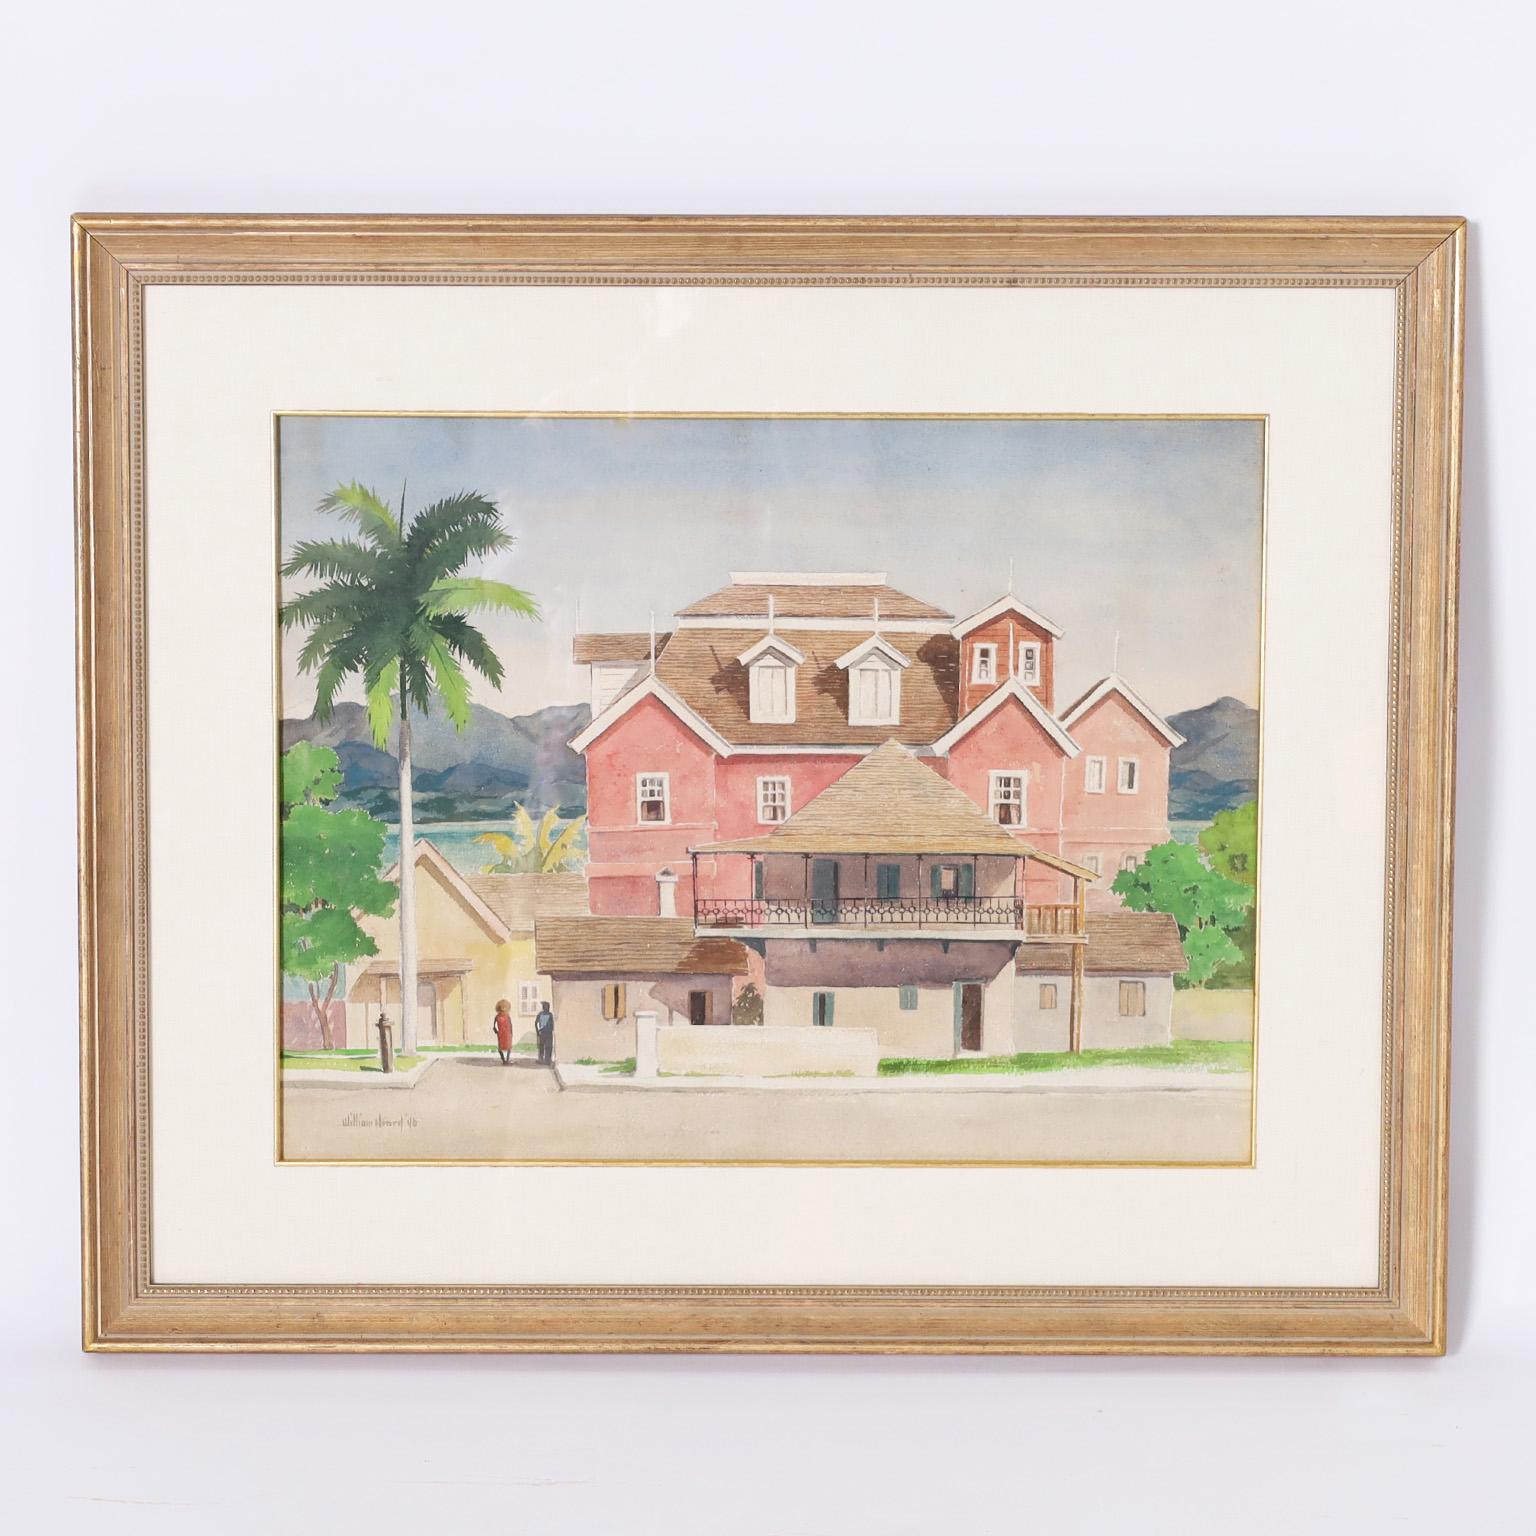 Watercolor Painting of Tropical Architecture in the Bahamas